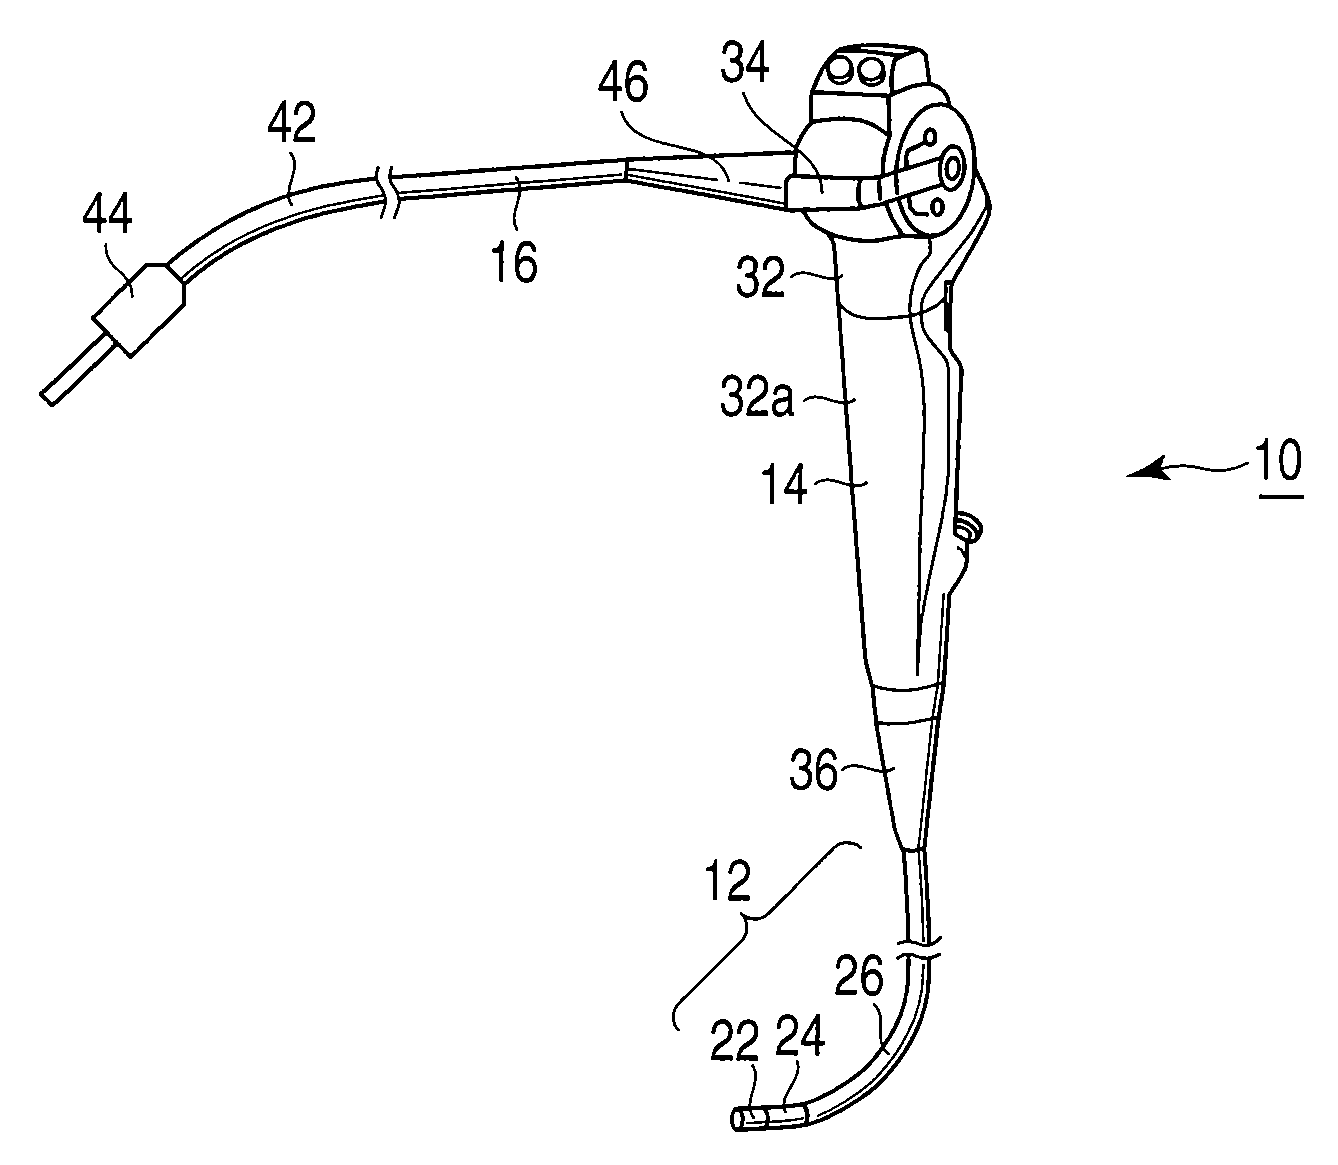 Endoscope and attaching method of connection mouth ring to end of endoscopic flexible tube